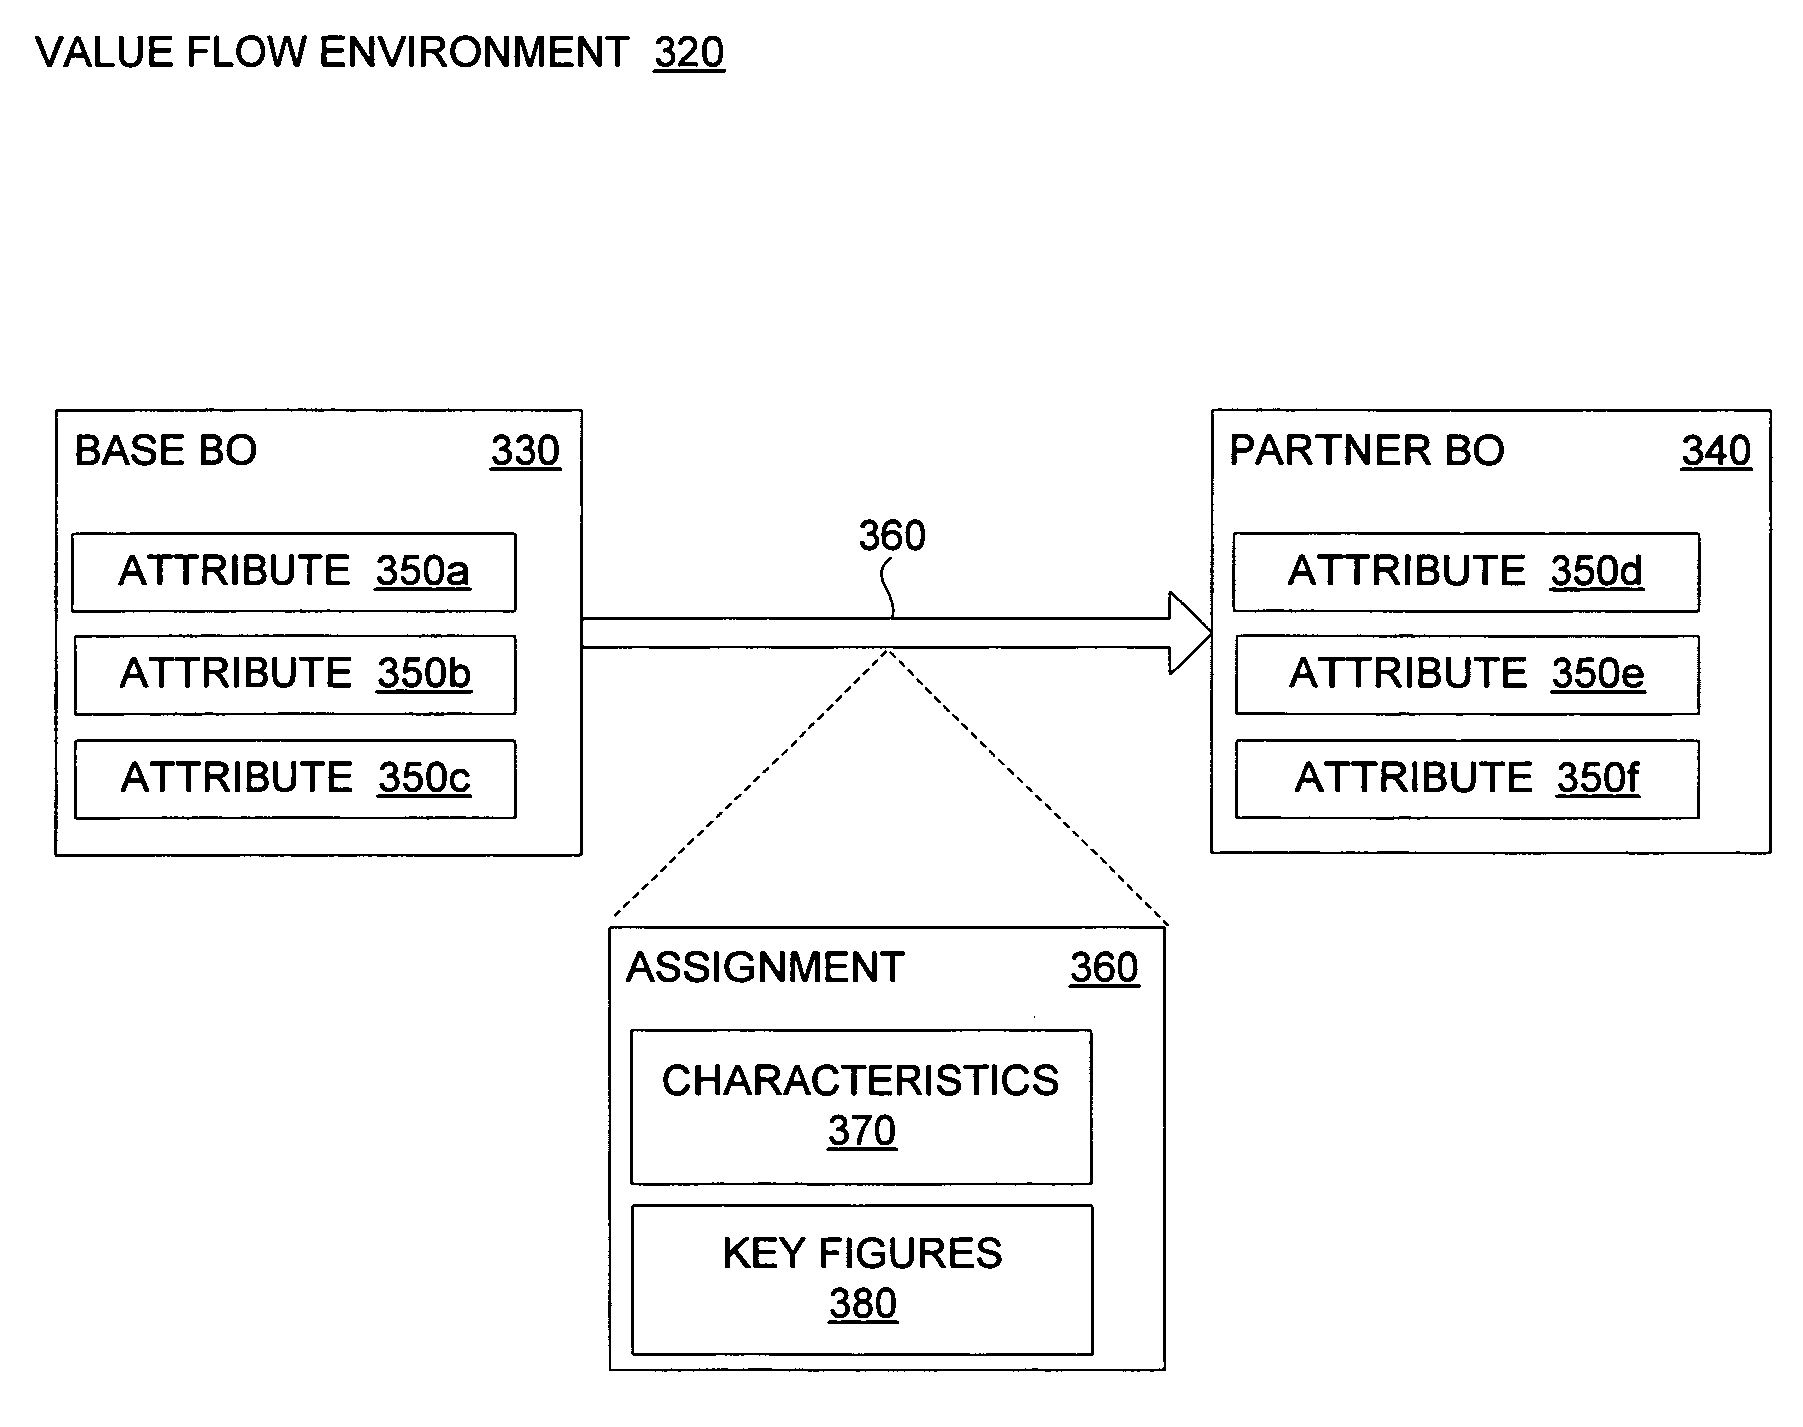 Systems and methods for handling attributes used for assignment generation in a value flow environment